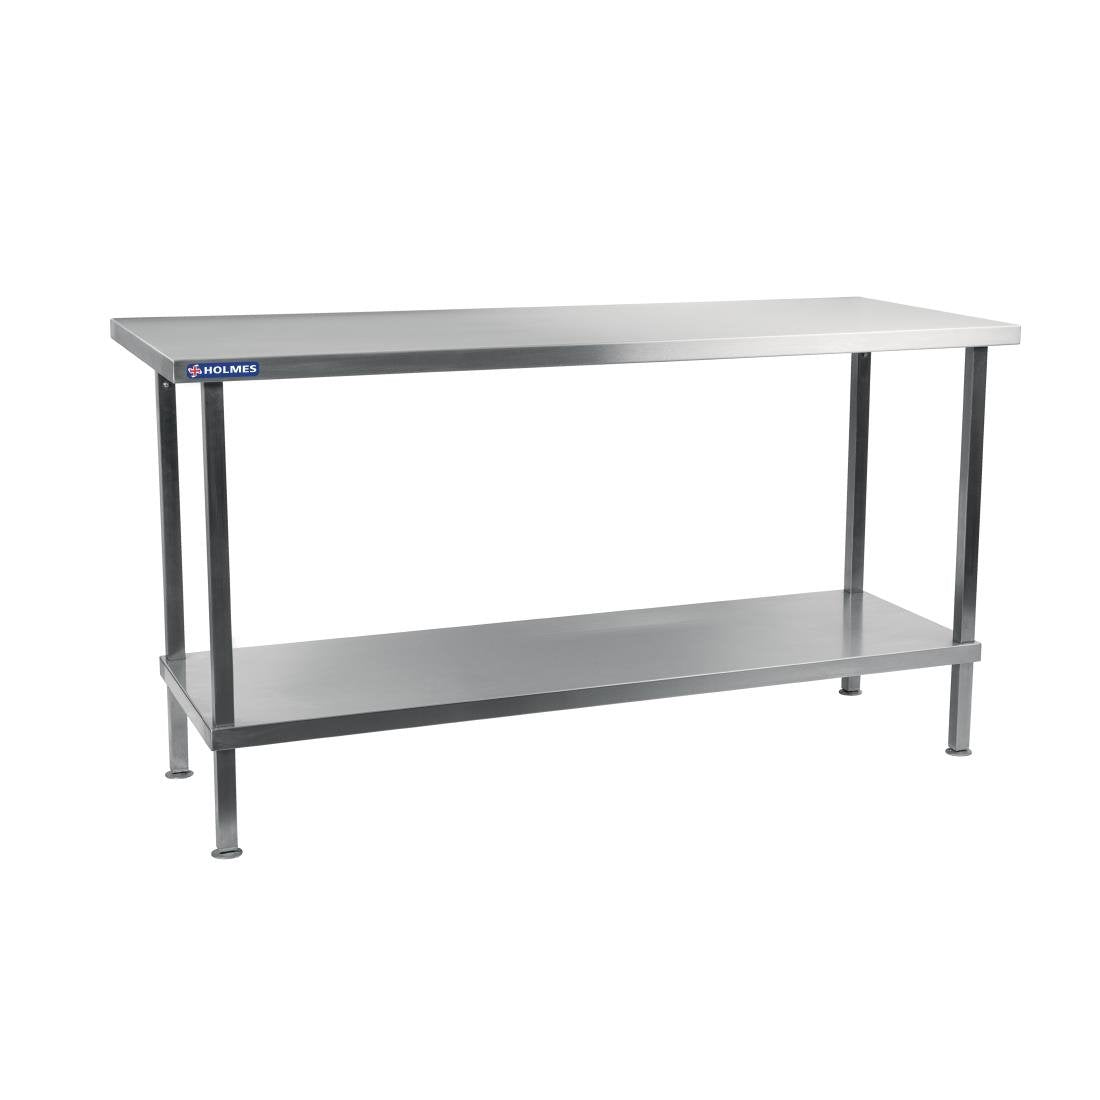 DR059 Holmes Stainless Steel Centre Table 2100mm JD Catering Equipment Solutions Ltd